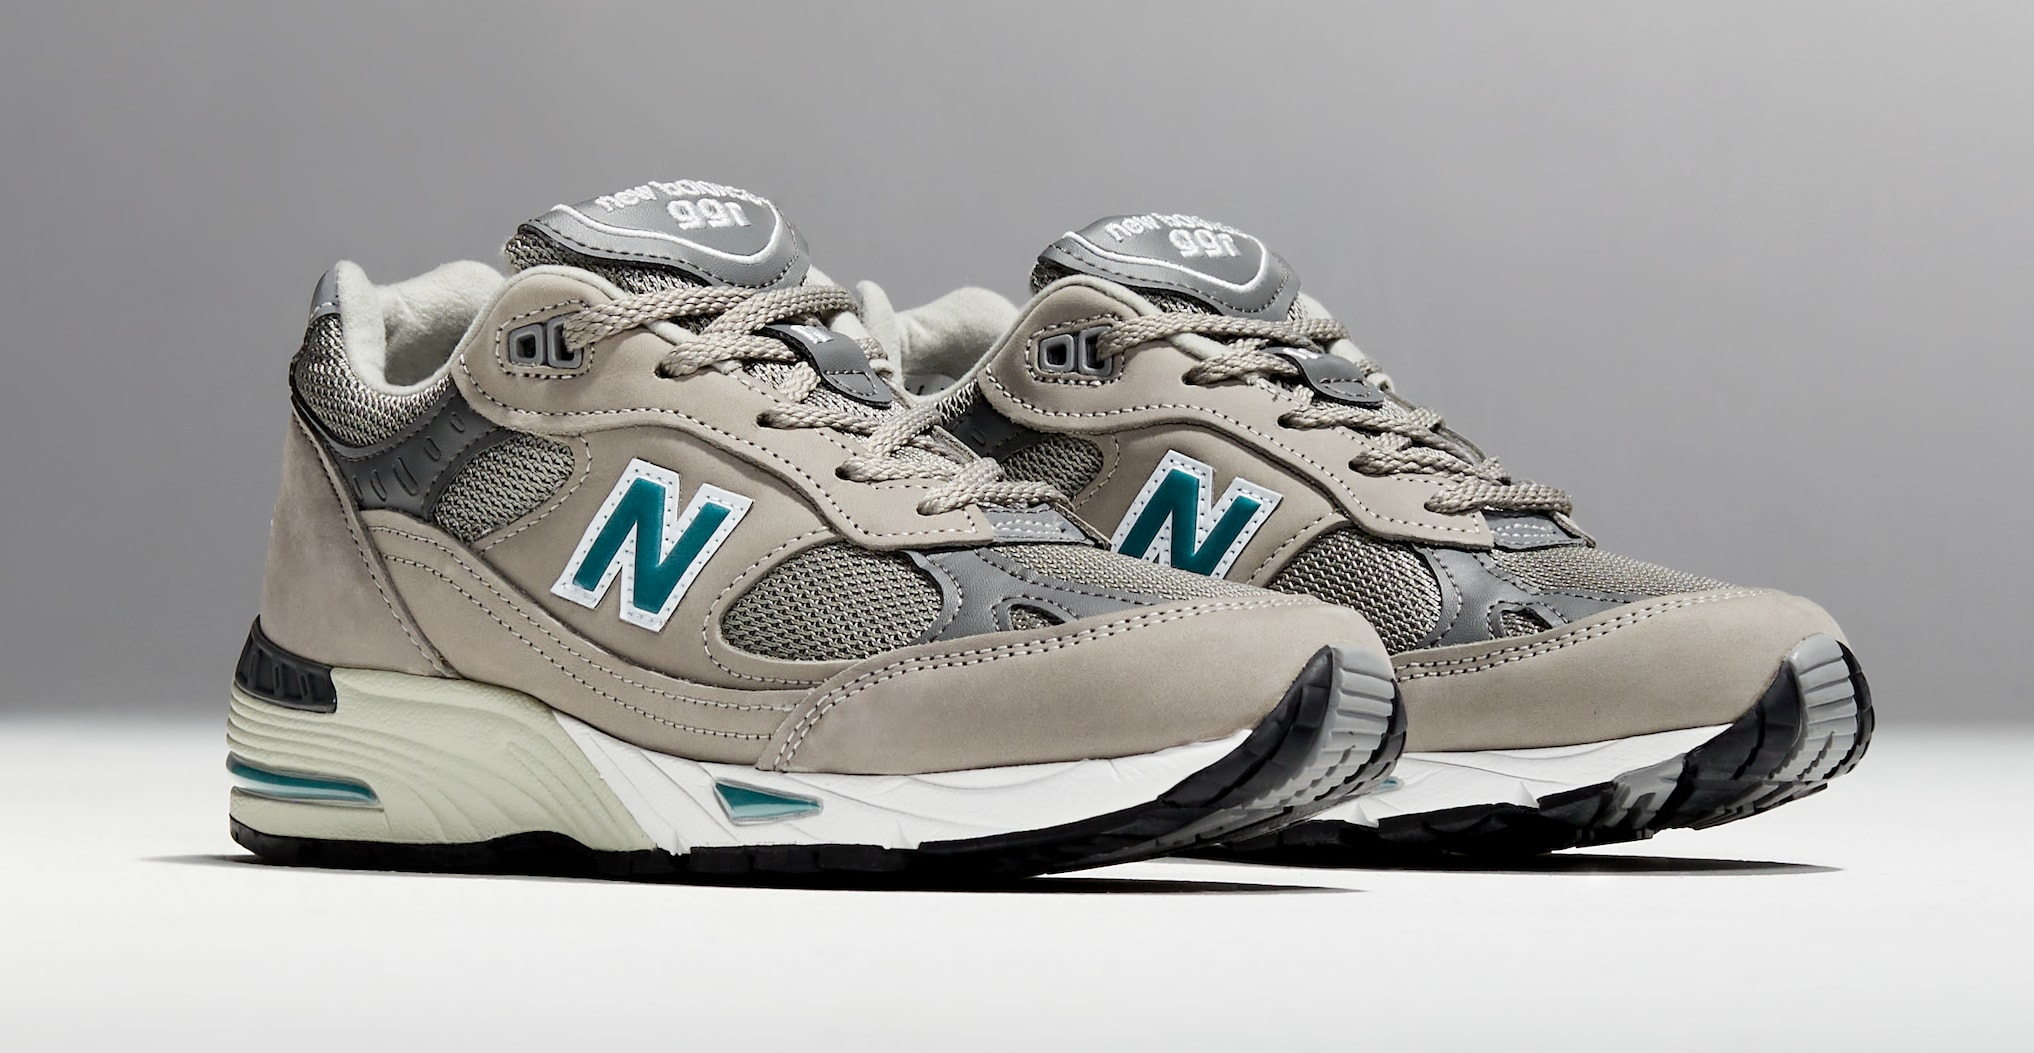 Estimate appeal Commerce New Balance 991 20th Anniversary Release Date February 2021 | Sole Collector